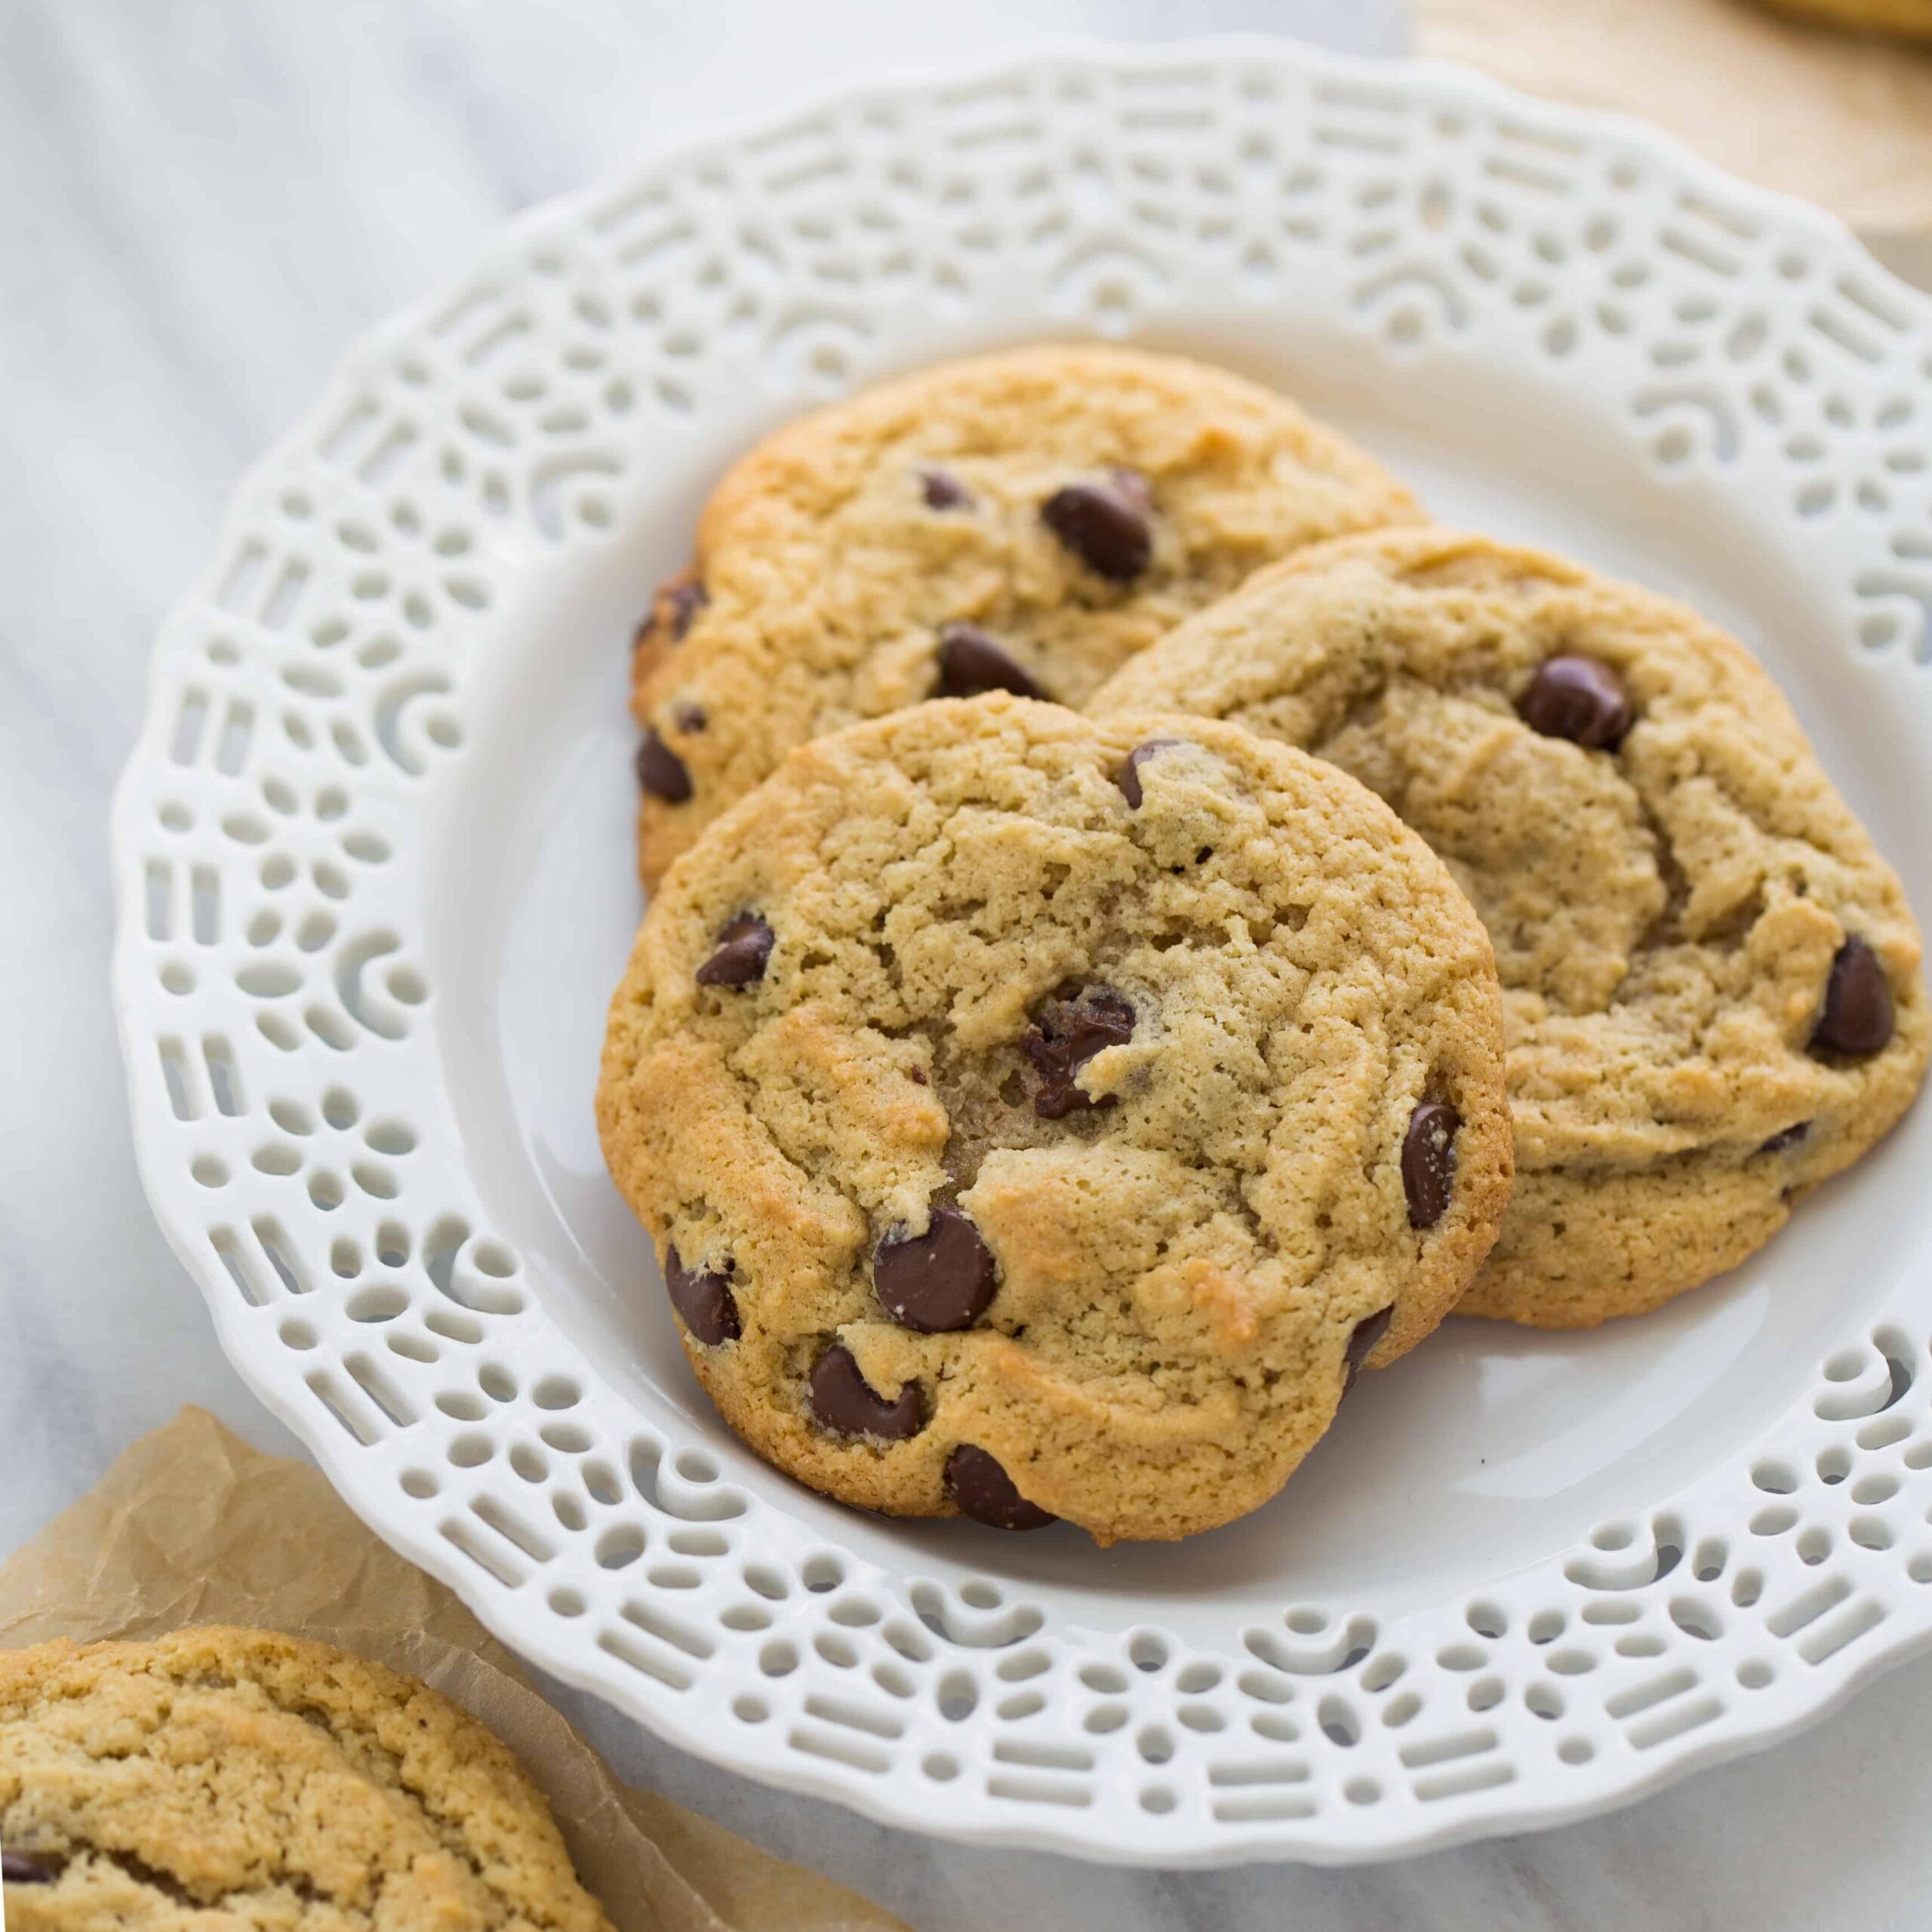  Satisfy your sweet tooth with these gluten-free cookies